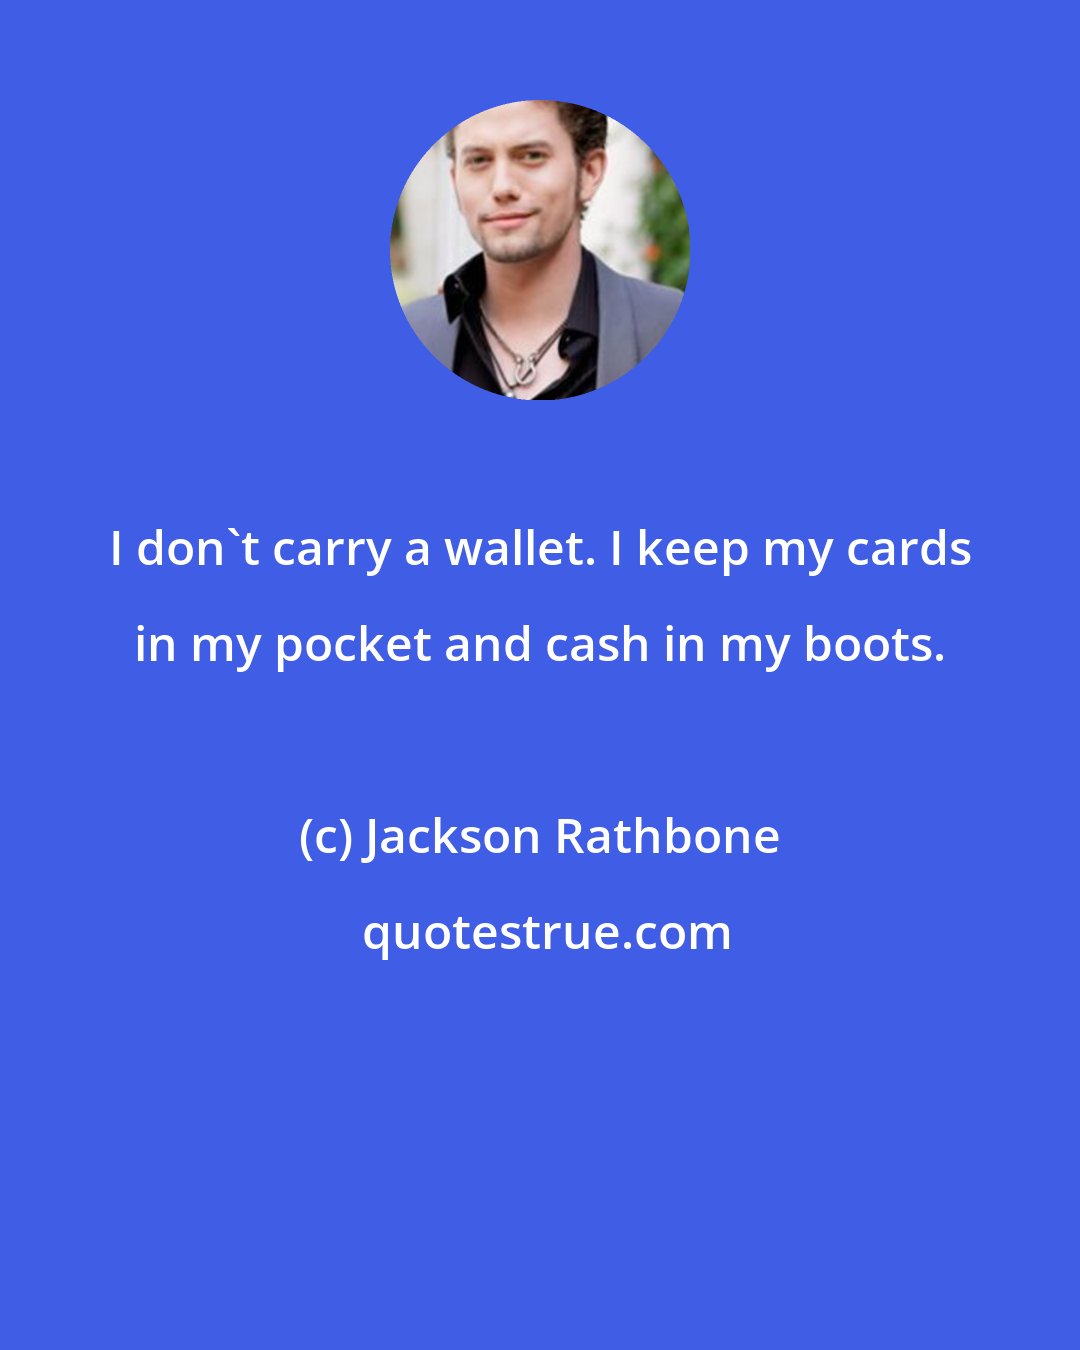 Jackson Rathbone: I don't carry a wallet. I keep my cards in my pocket and cash in my boots.